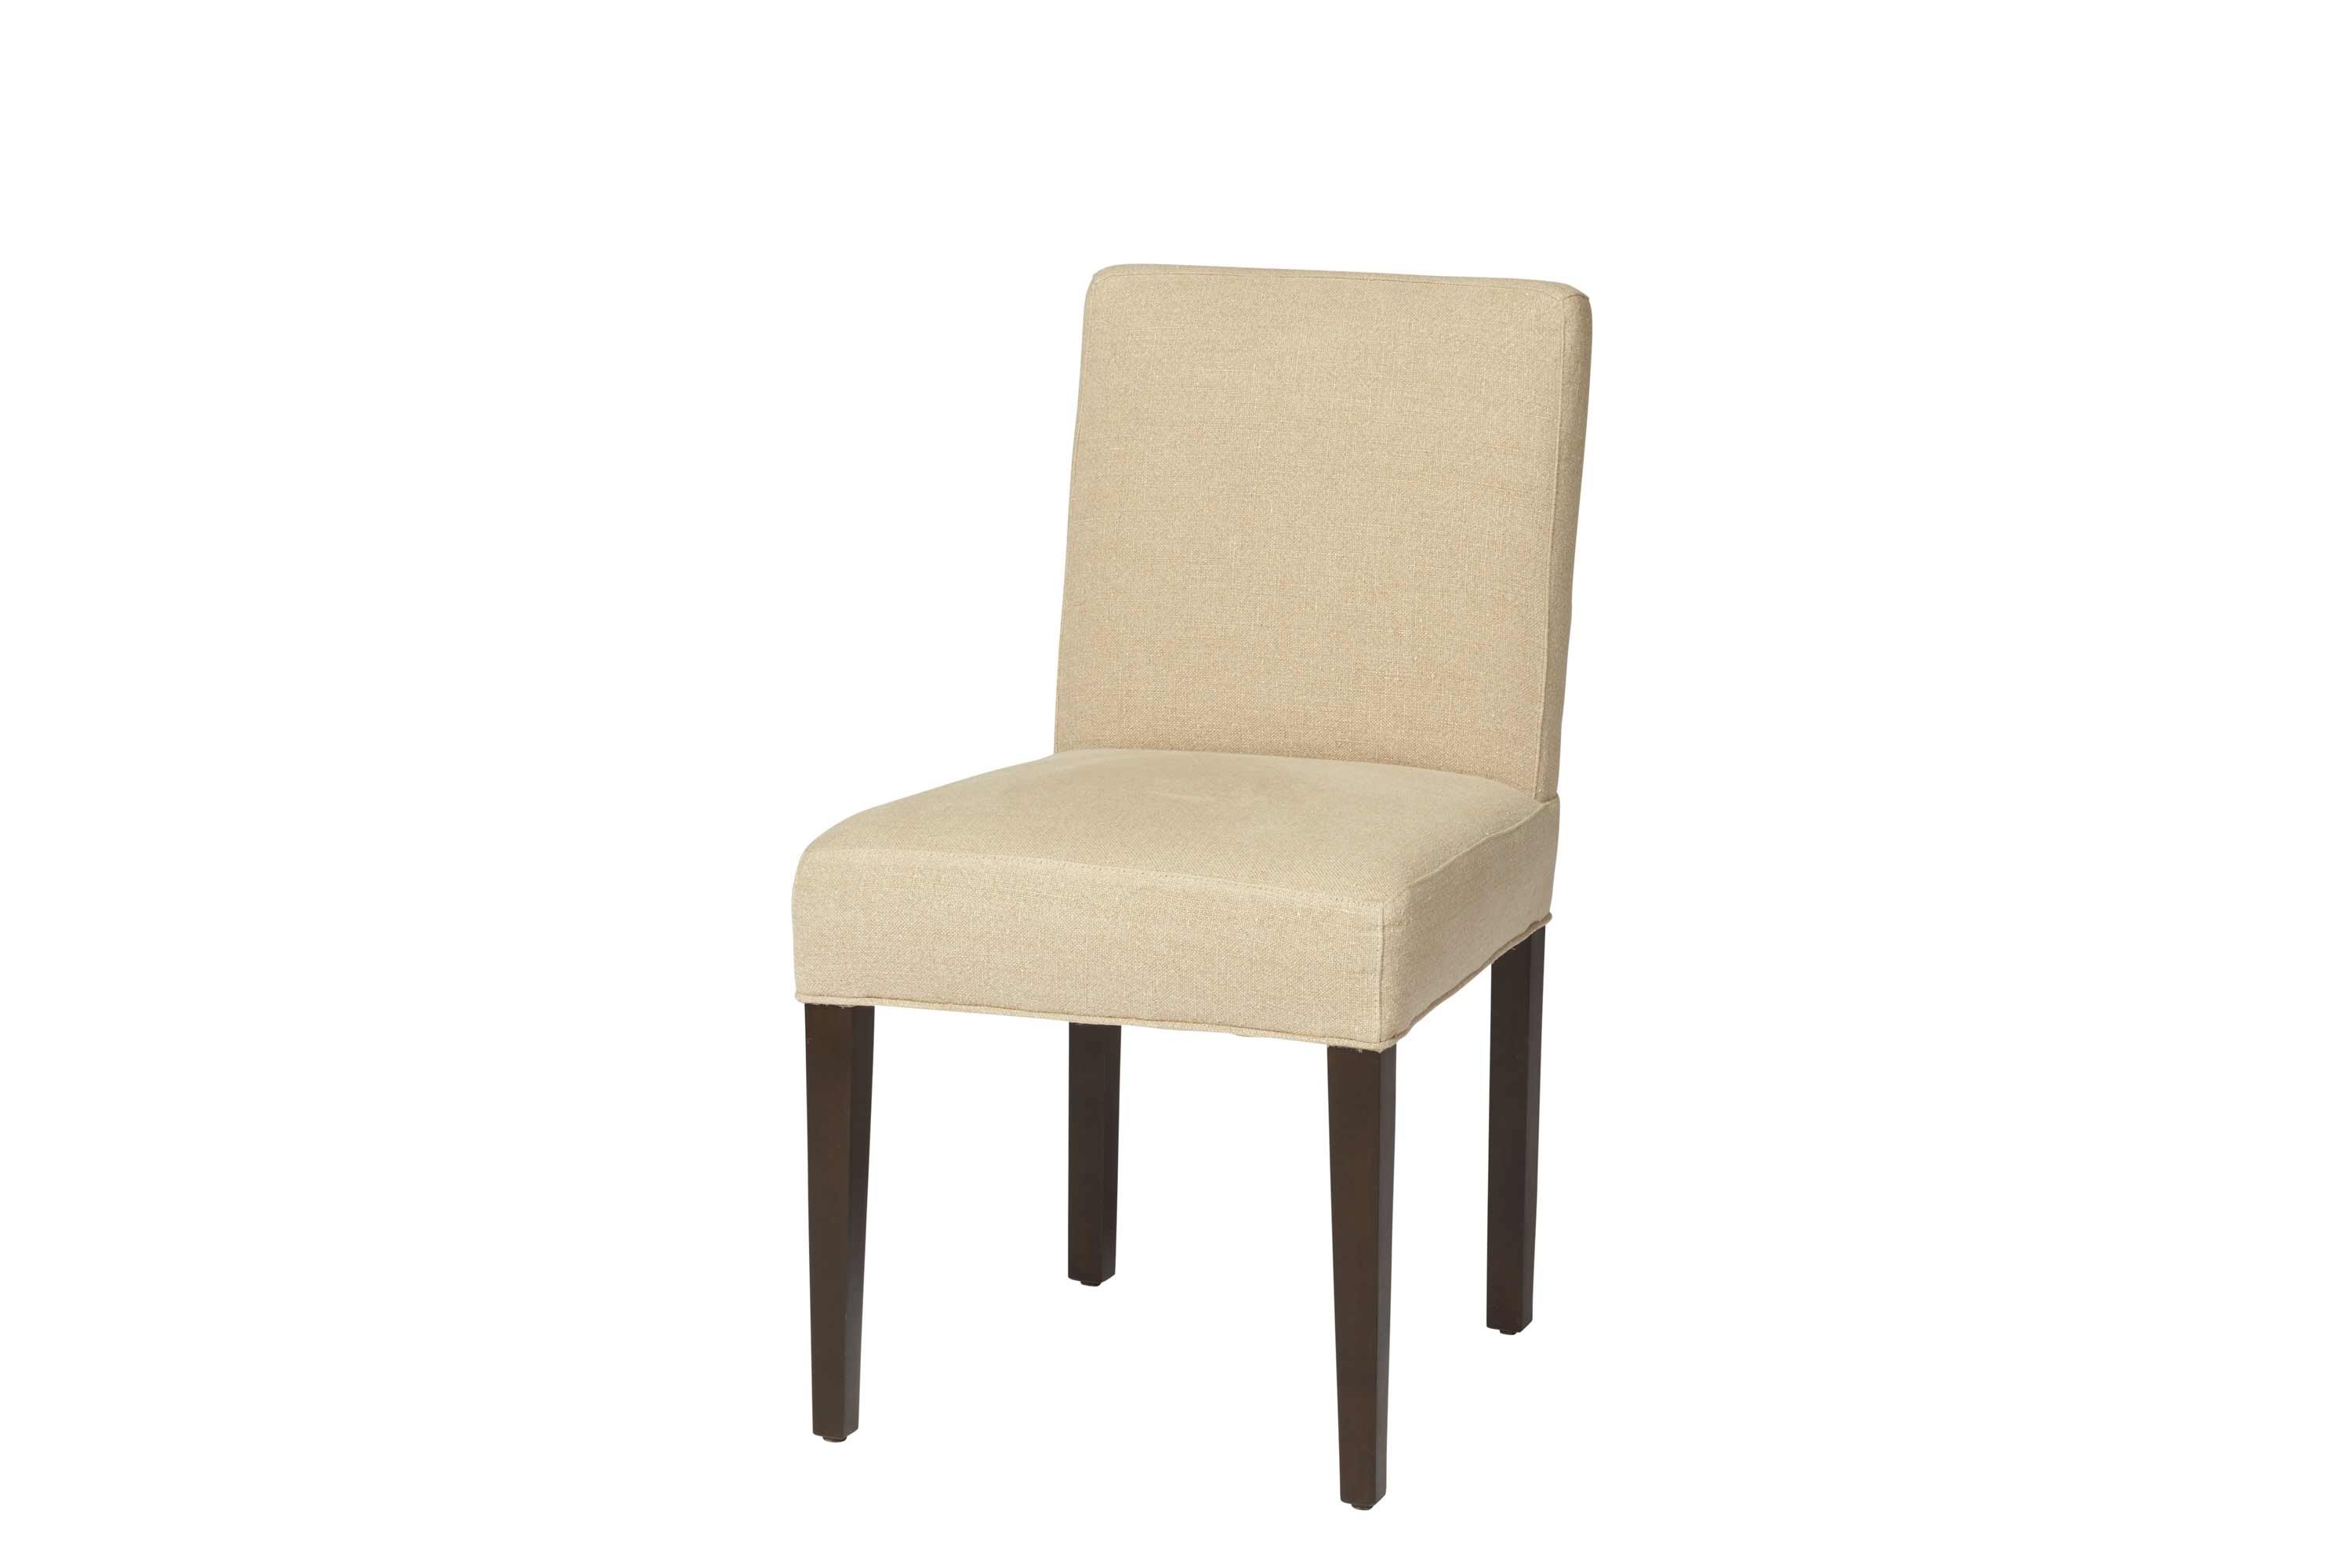 Armless Oatmeal Dining Chairs For Best And Newest Dining Chairs (View 4 of 20)